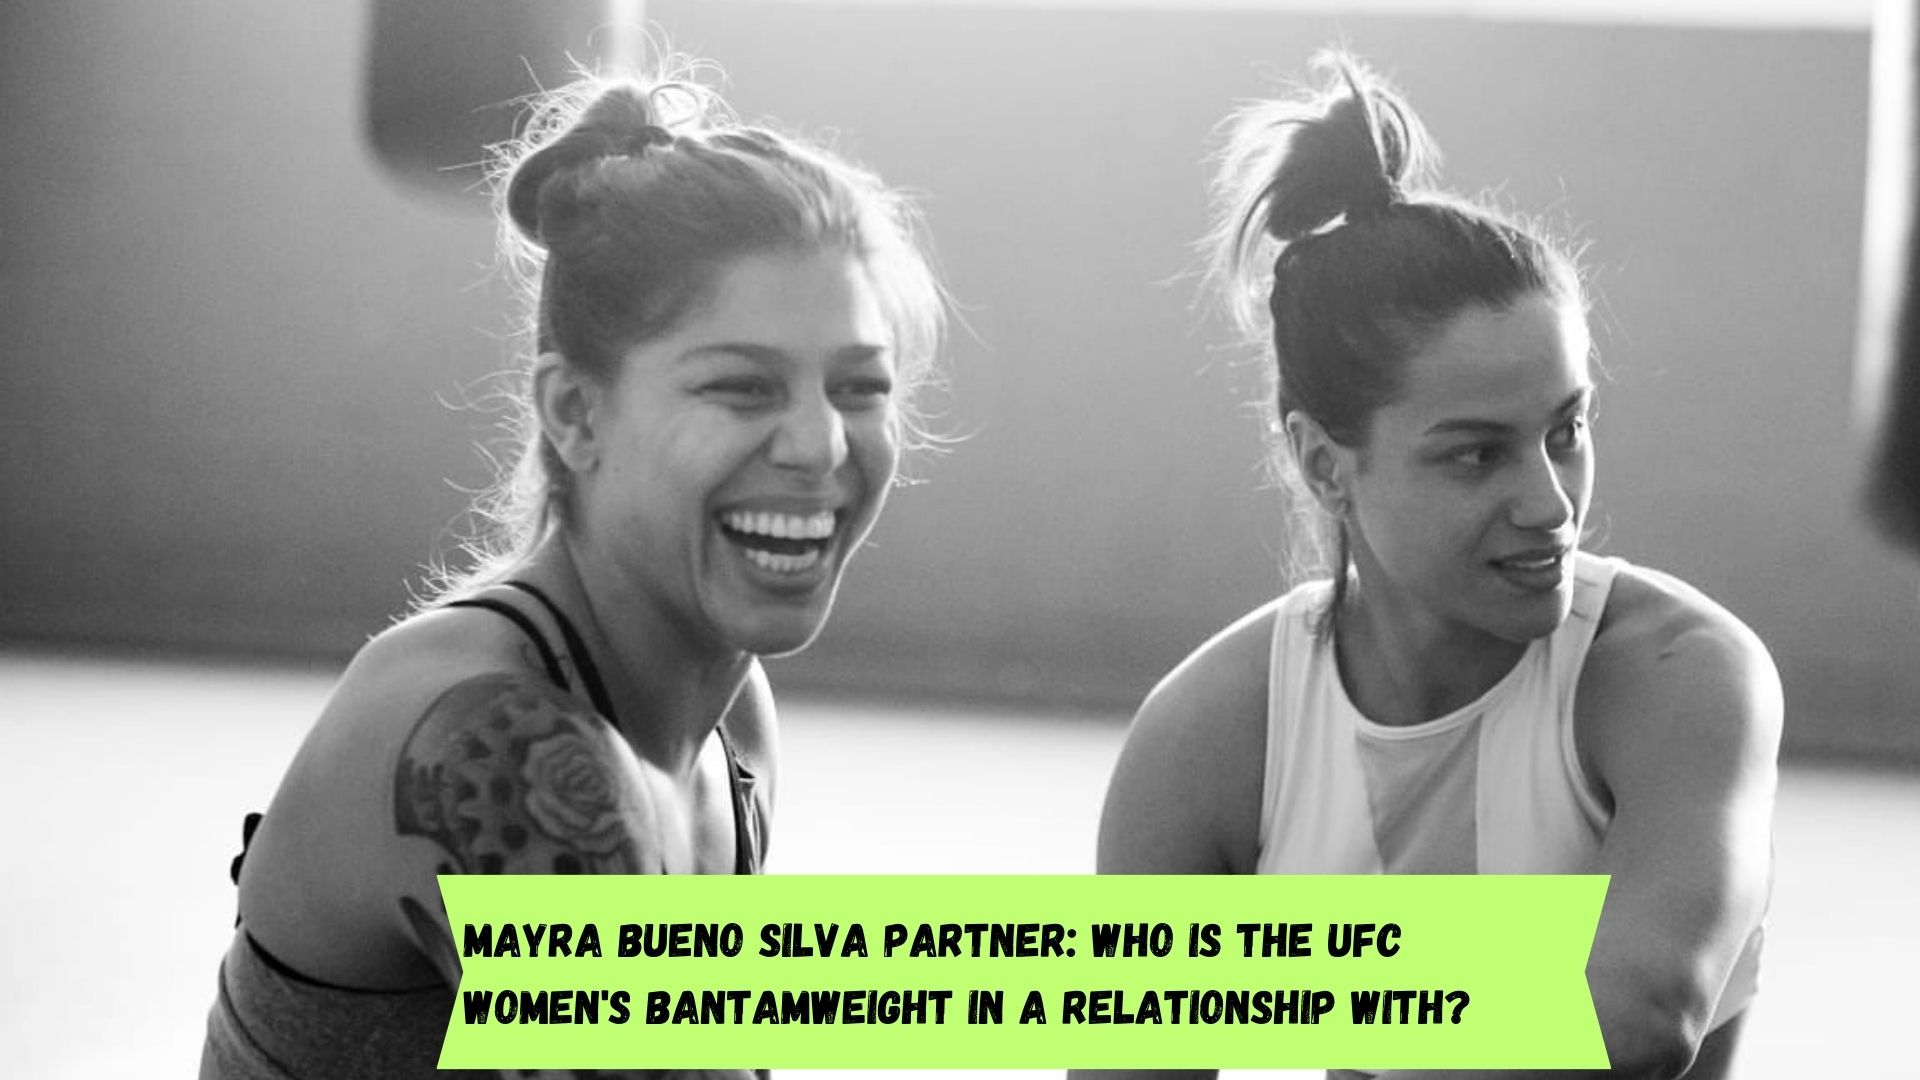 Mayra Bueno Silva partner: Who is the UFC women's bantamweight in a relationship with?